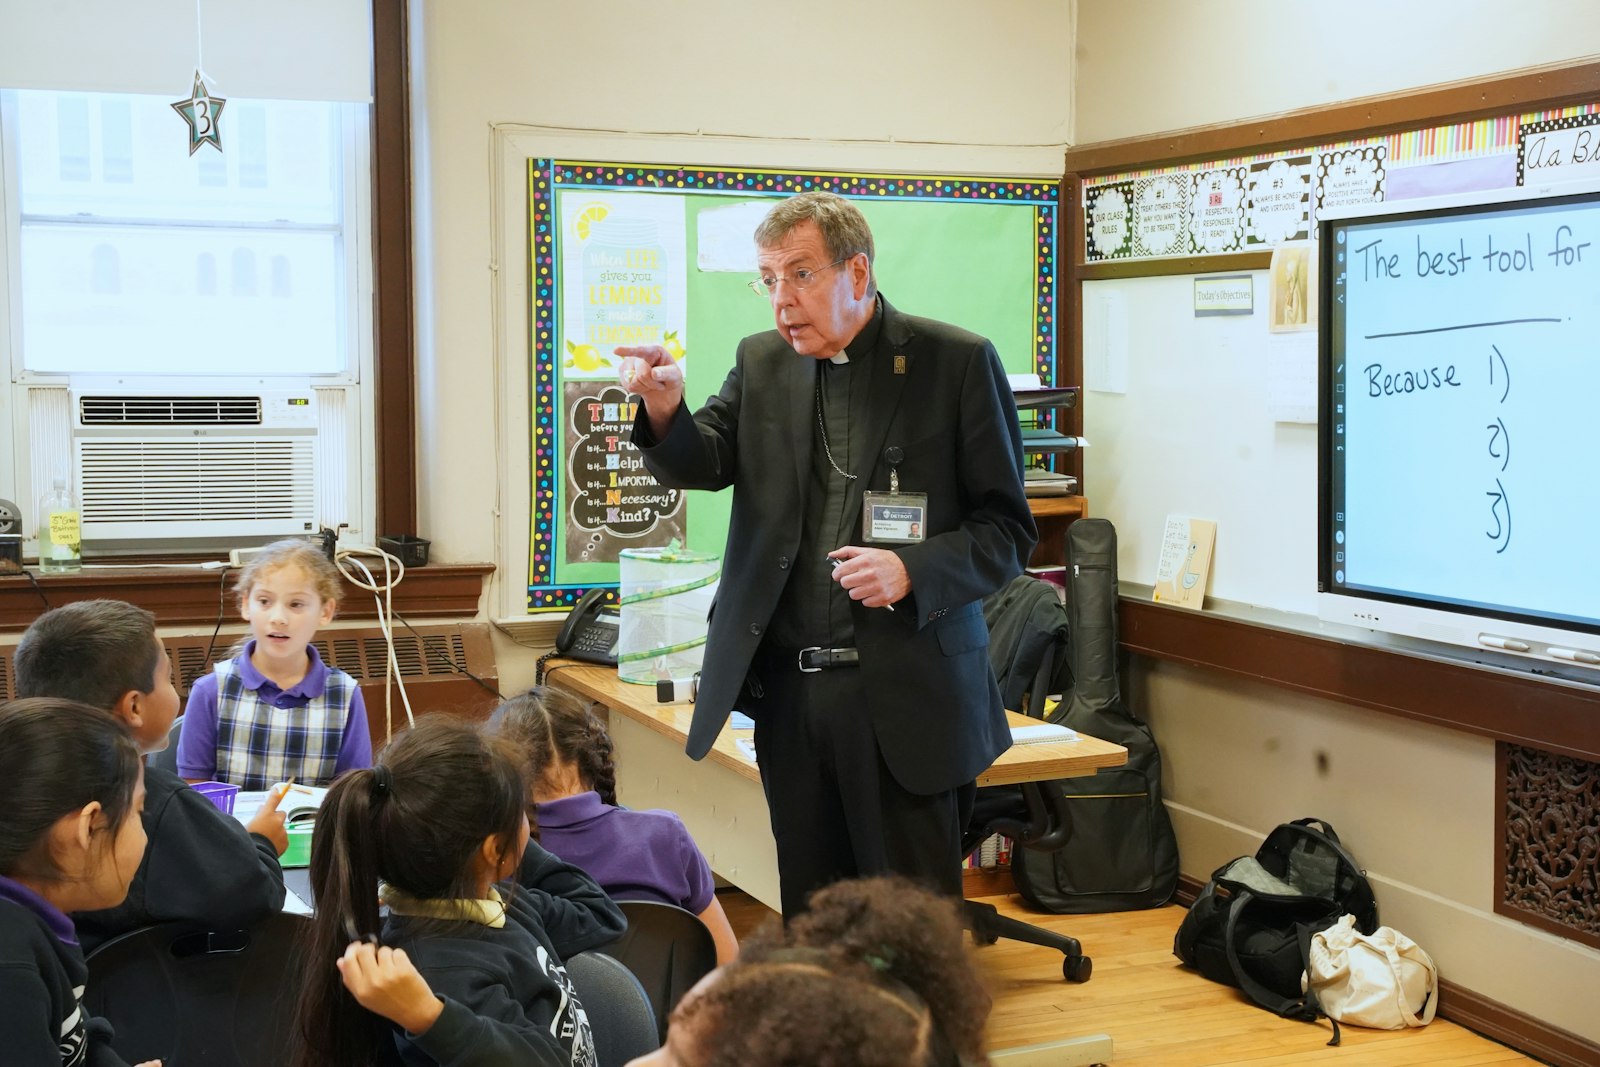 Archbishop Vigneron visited classes at Holy Redeemer School in Detroit after attending a scholarship granting ceremony where 14 students received scholarships.